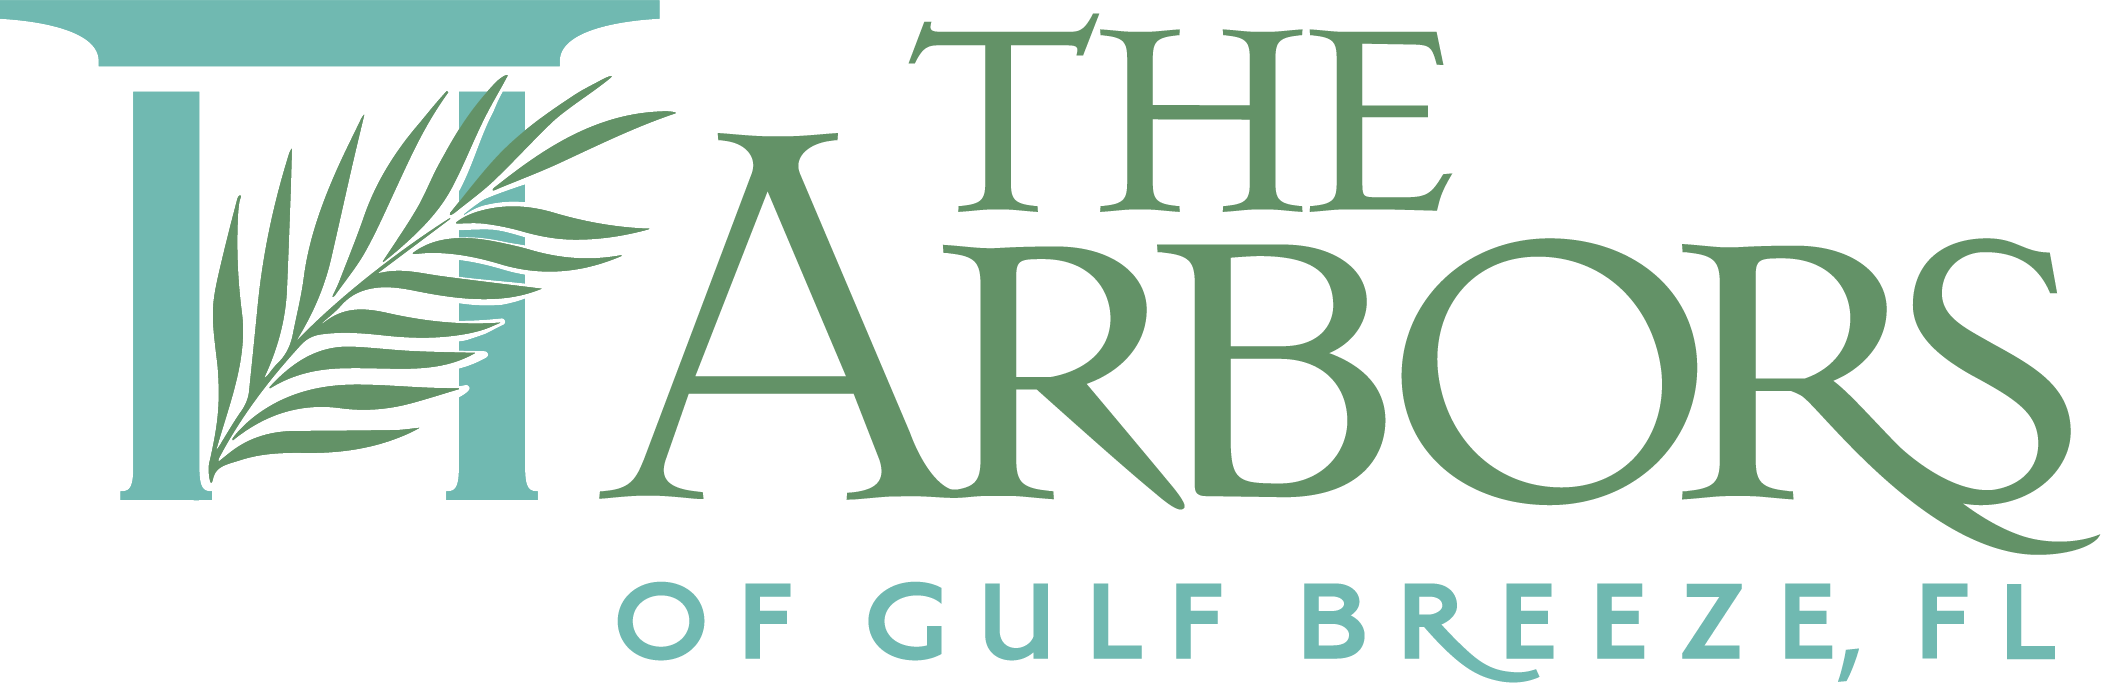 Arbors of Gulf Breeze Home